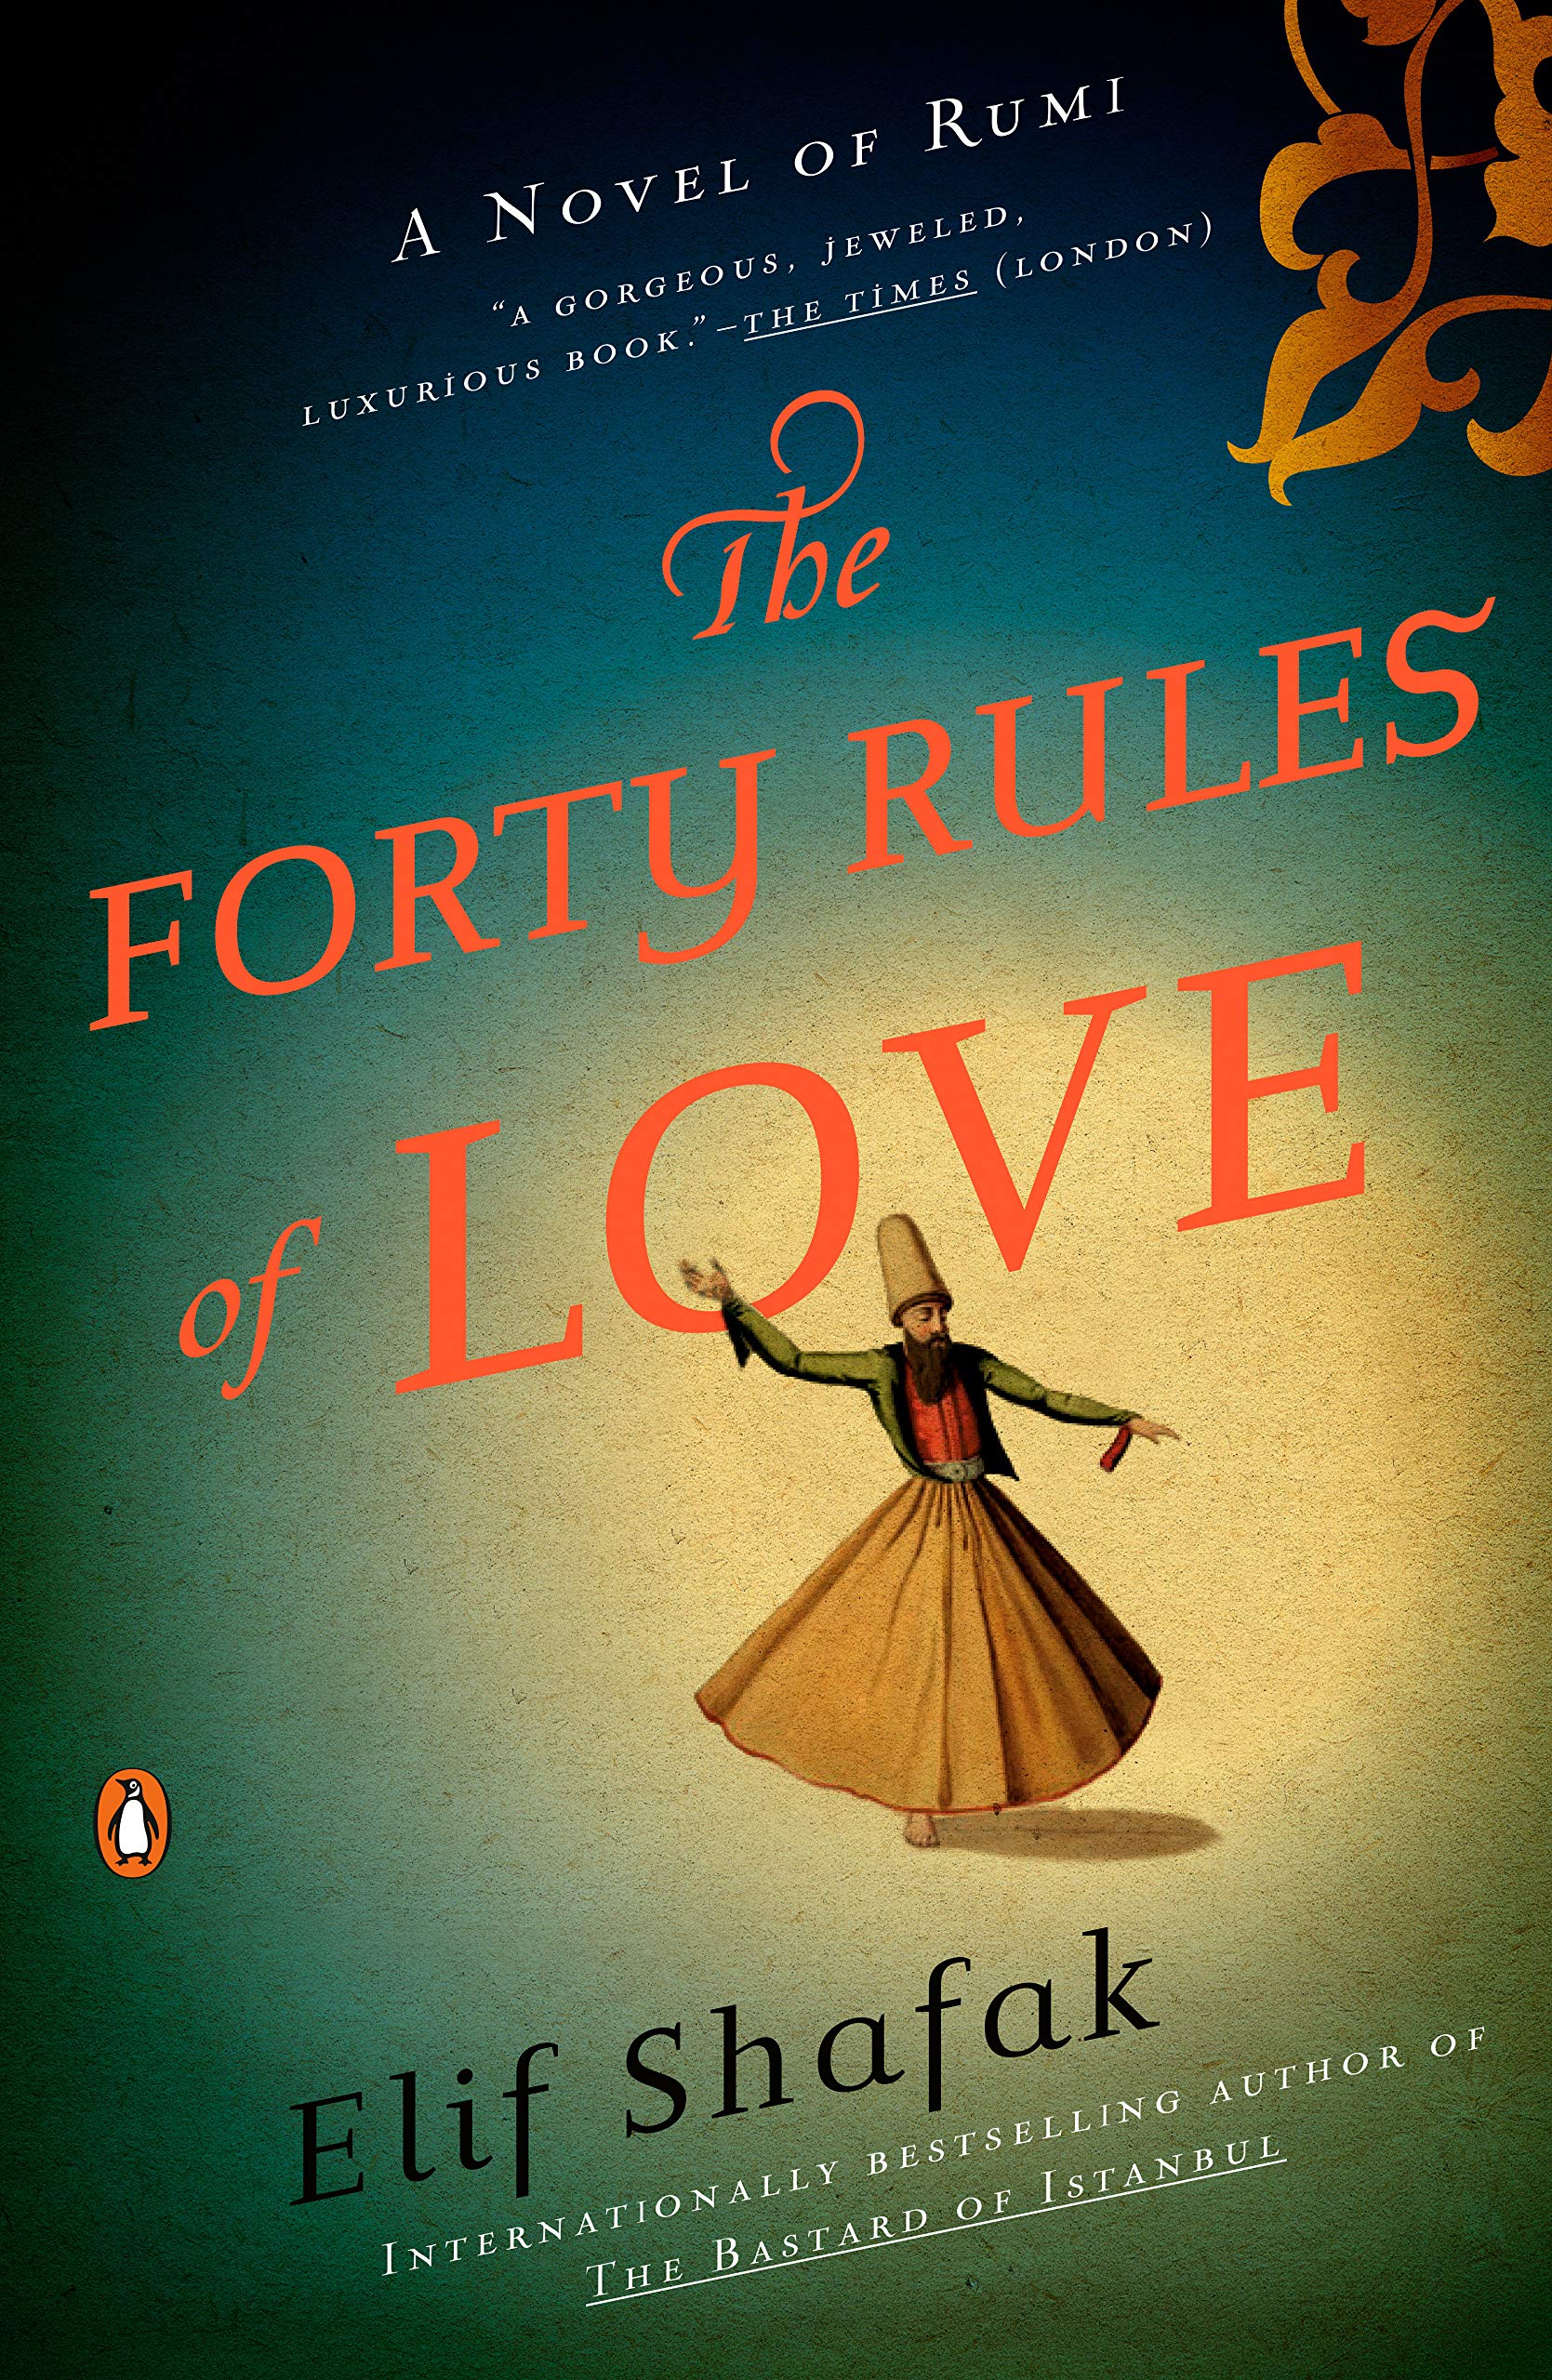 Forty Rules of Love